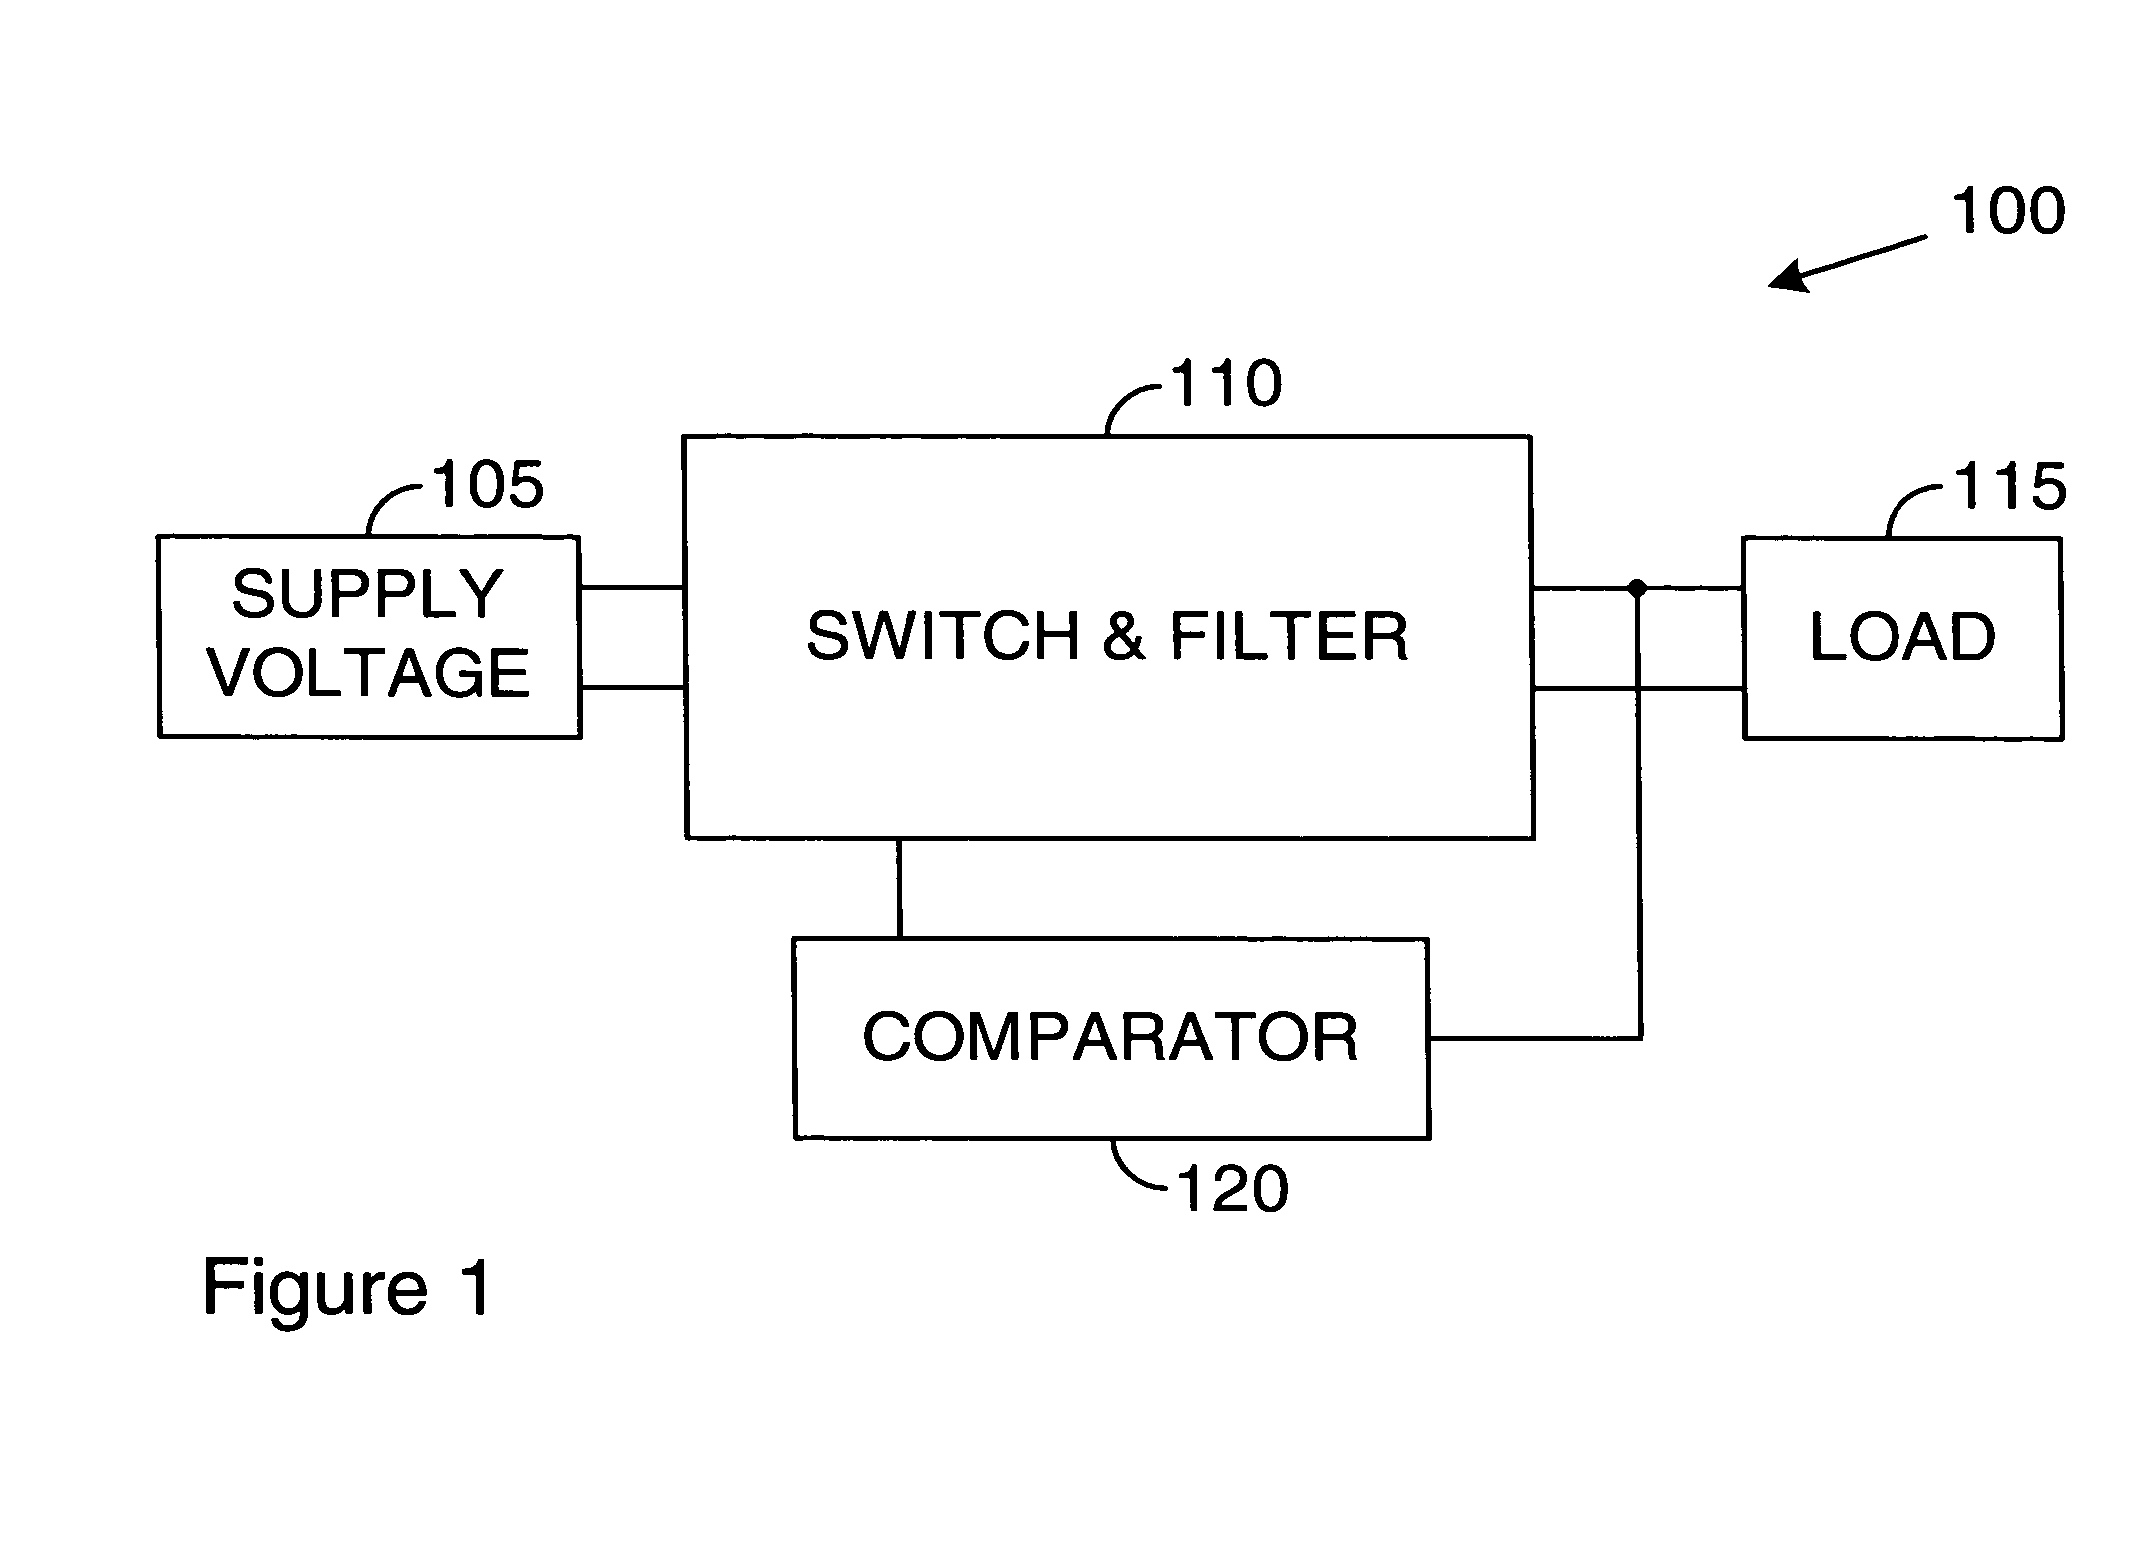 Hysteretic controlled switch regulator with fixed off time